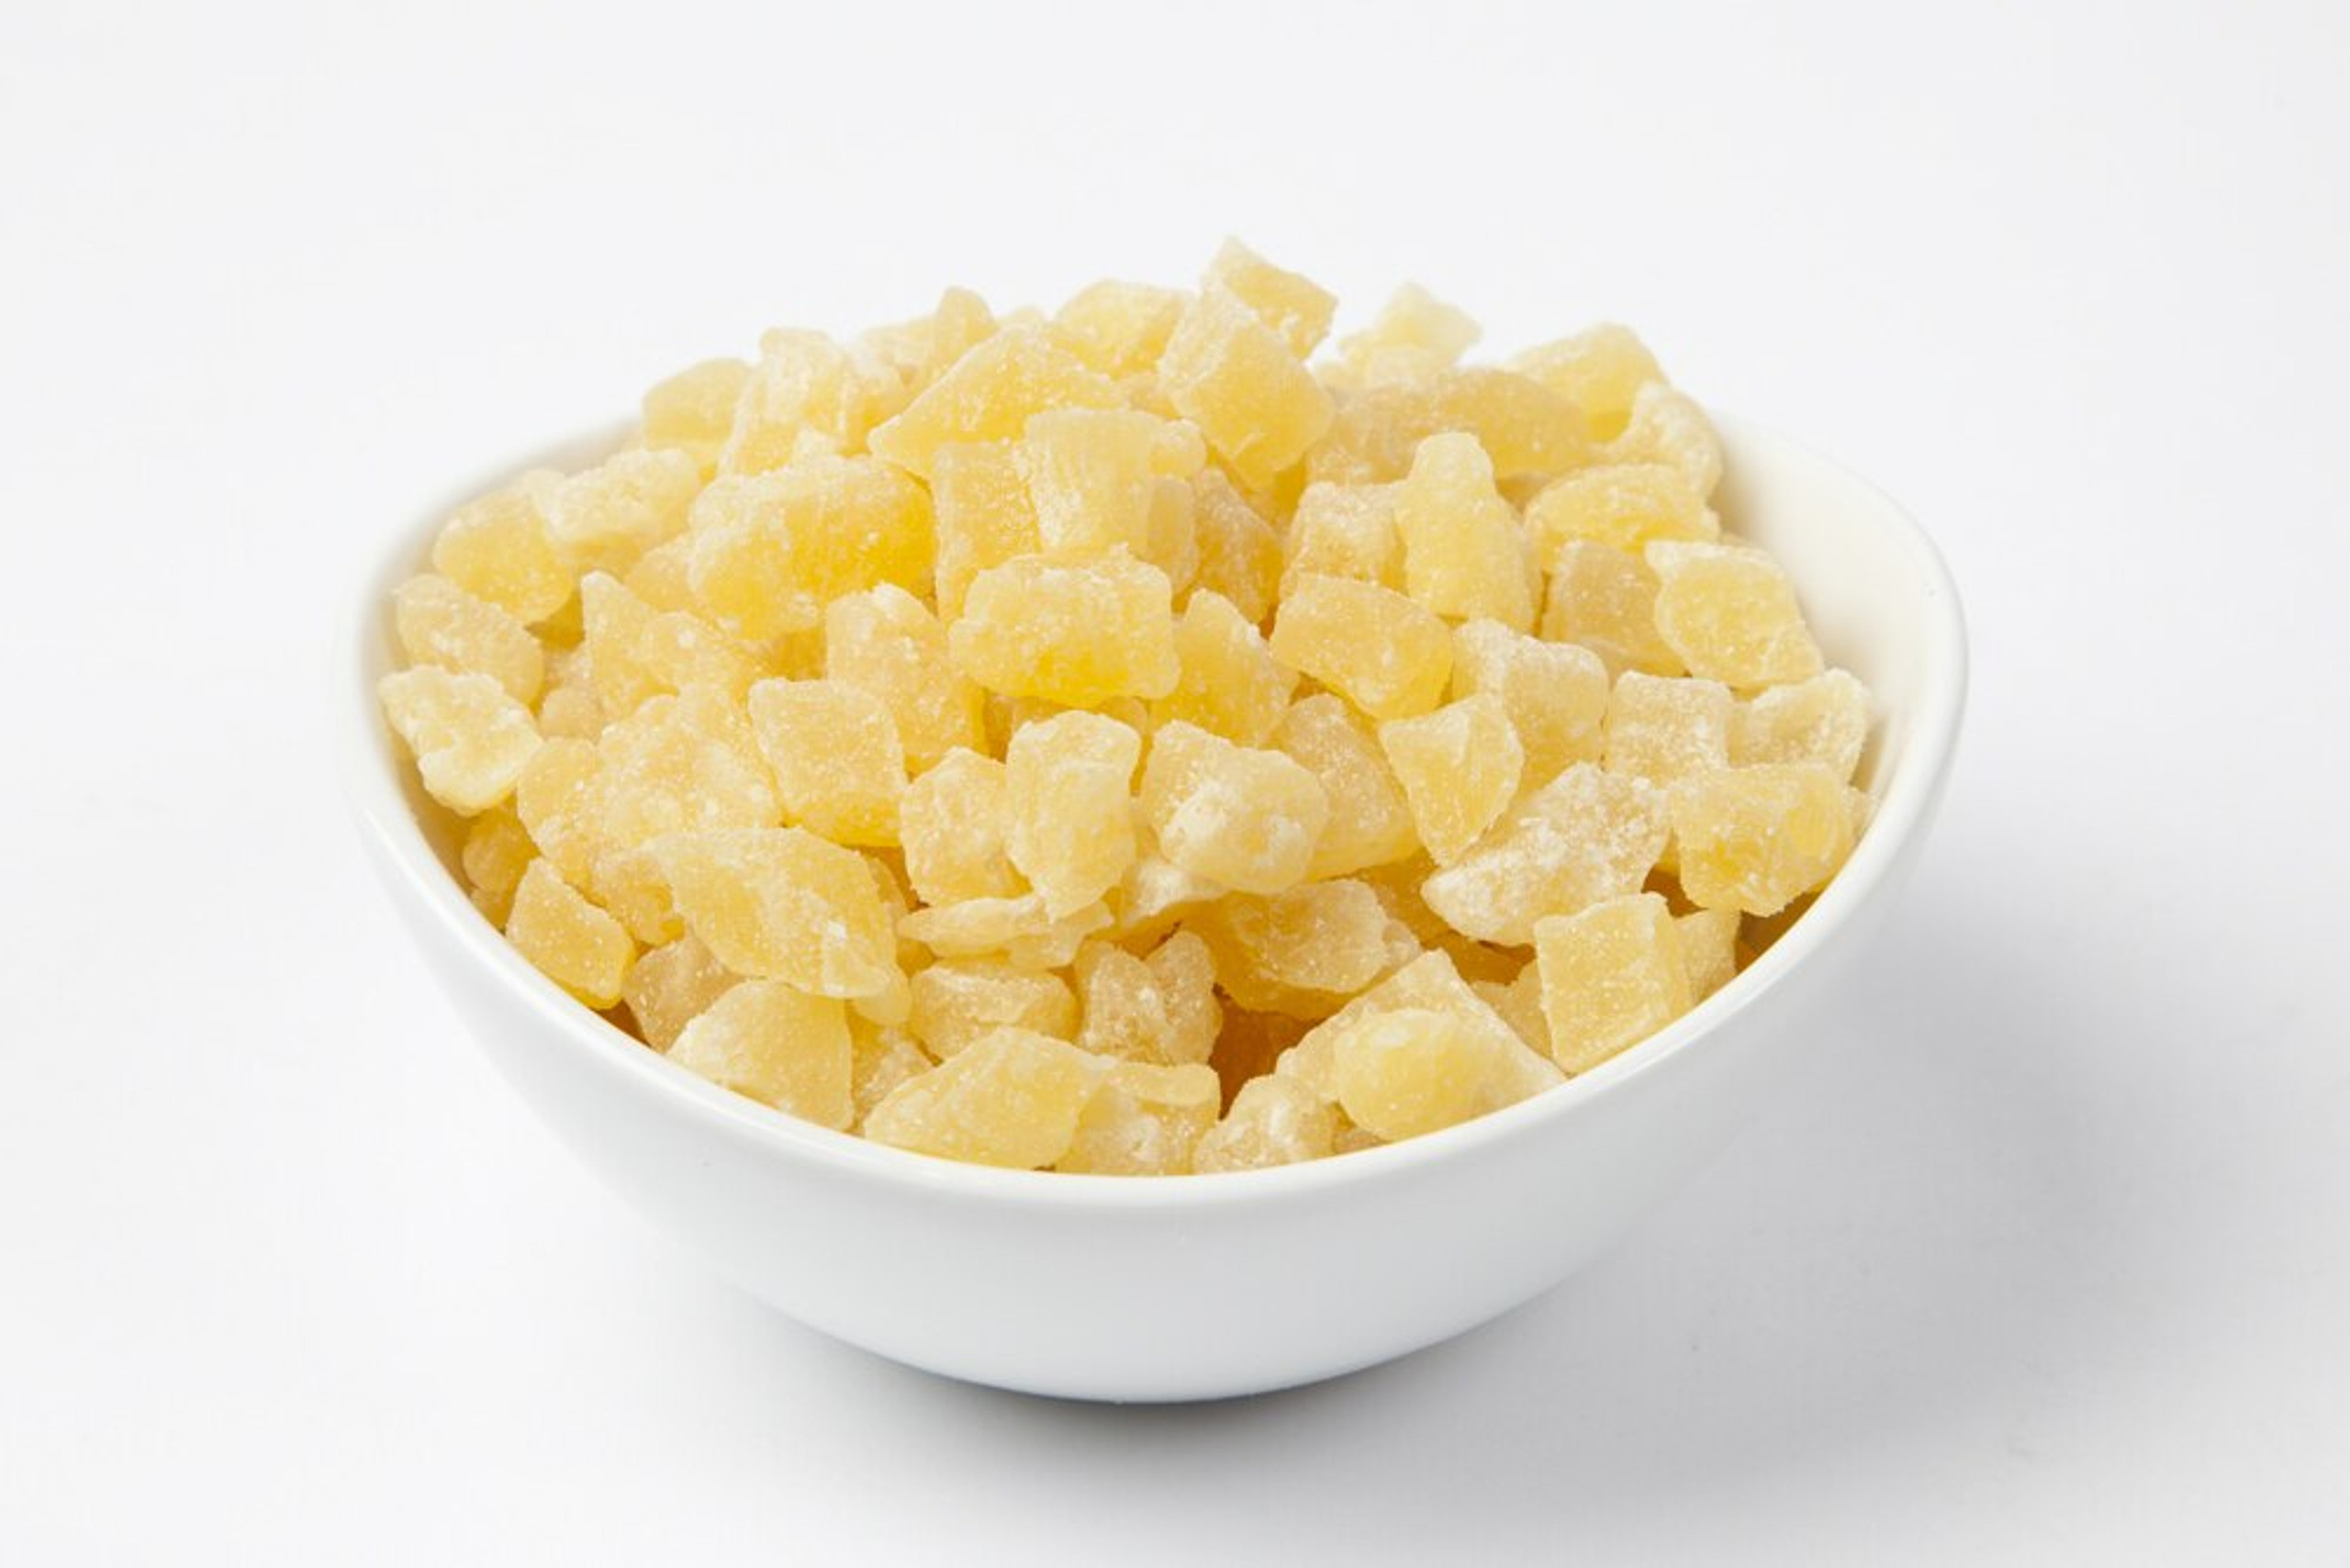 Buy Dried Pineapple (Diced) from NutsinBulk | Nuts in Bulk Official ...